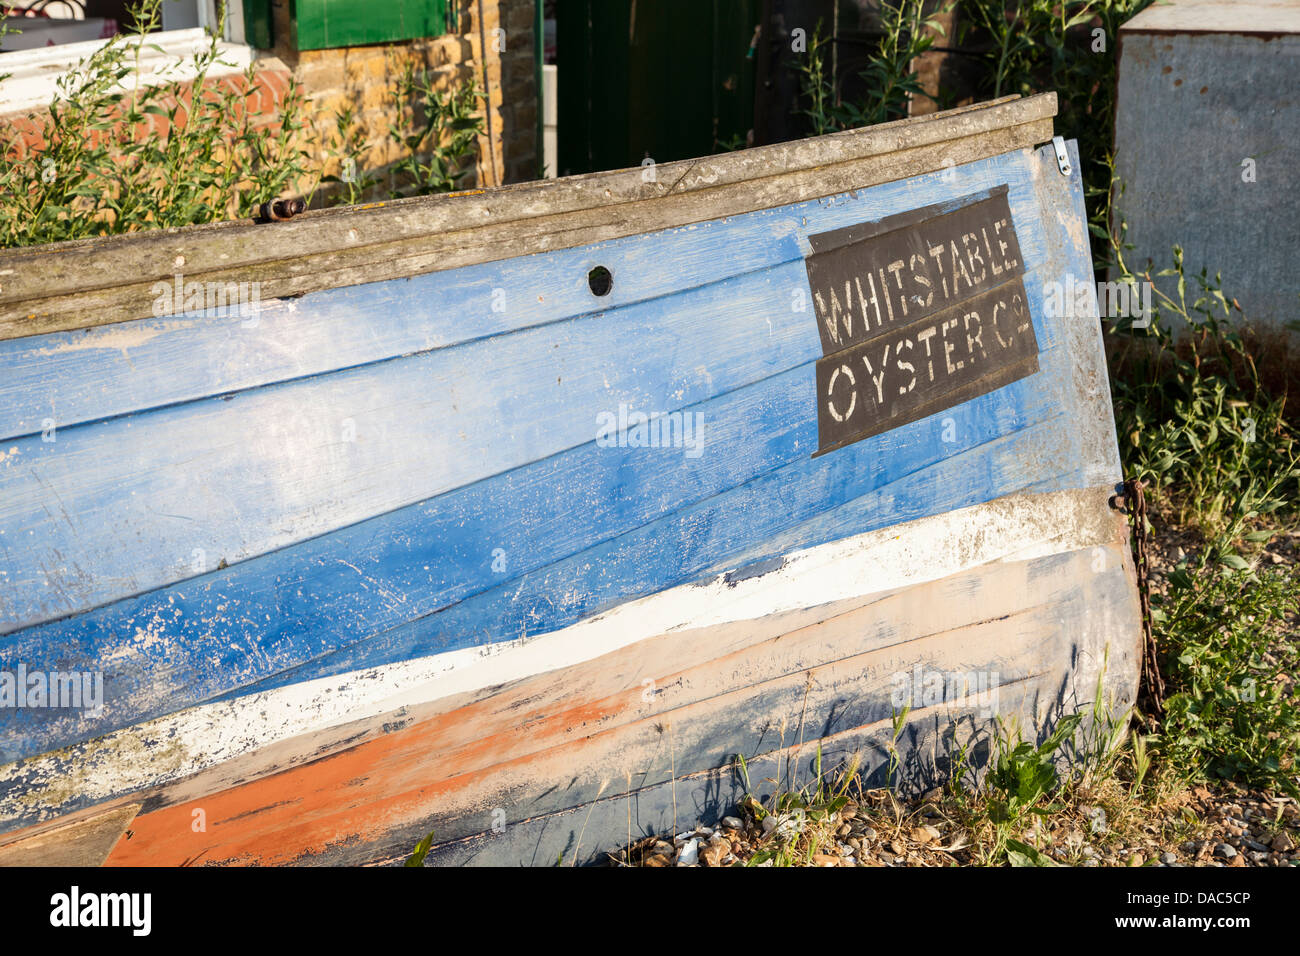 Boat with Whitstable Oyster sign, blue and red old boat in foreground Stock Photo